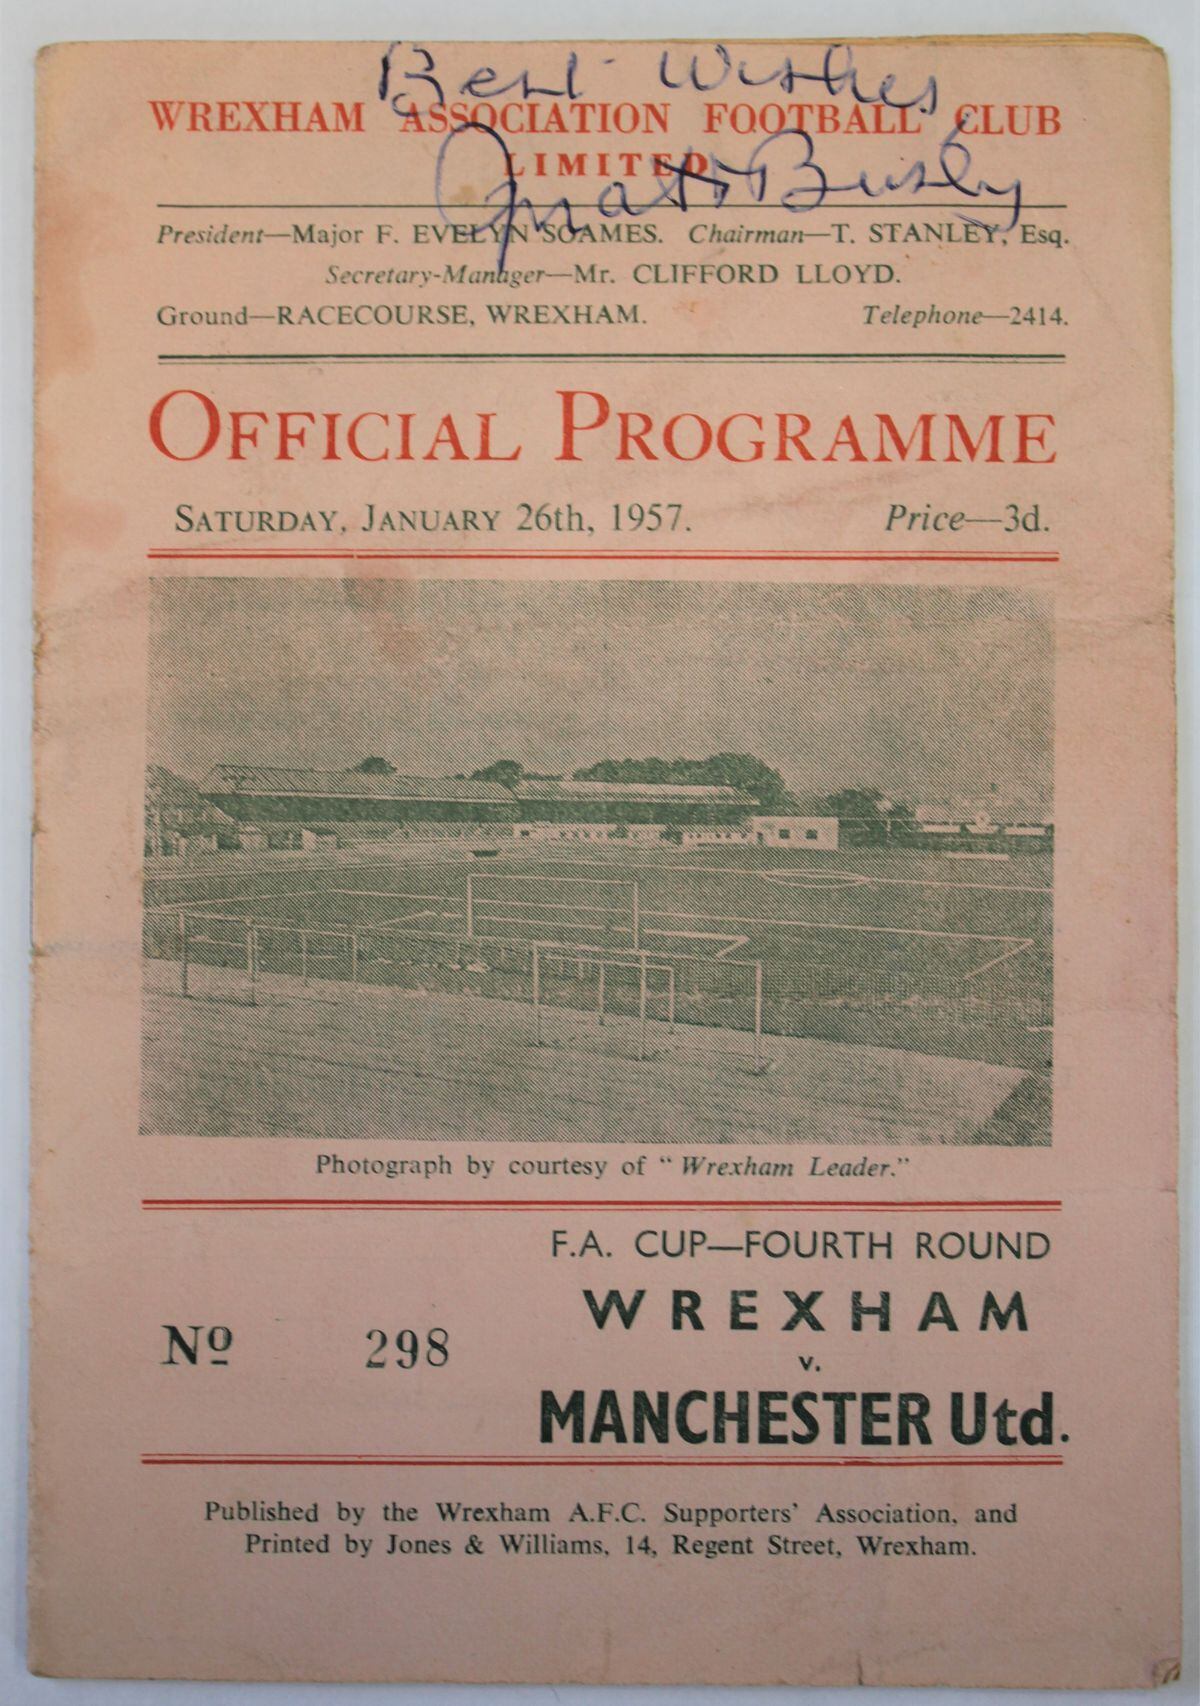 The signed programme sold for £650